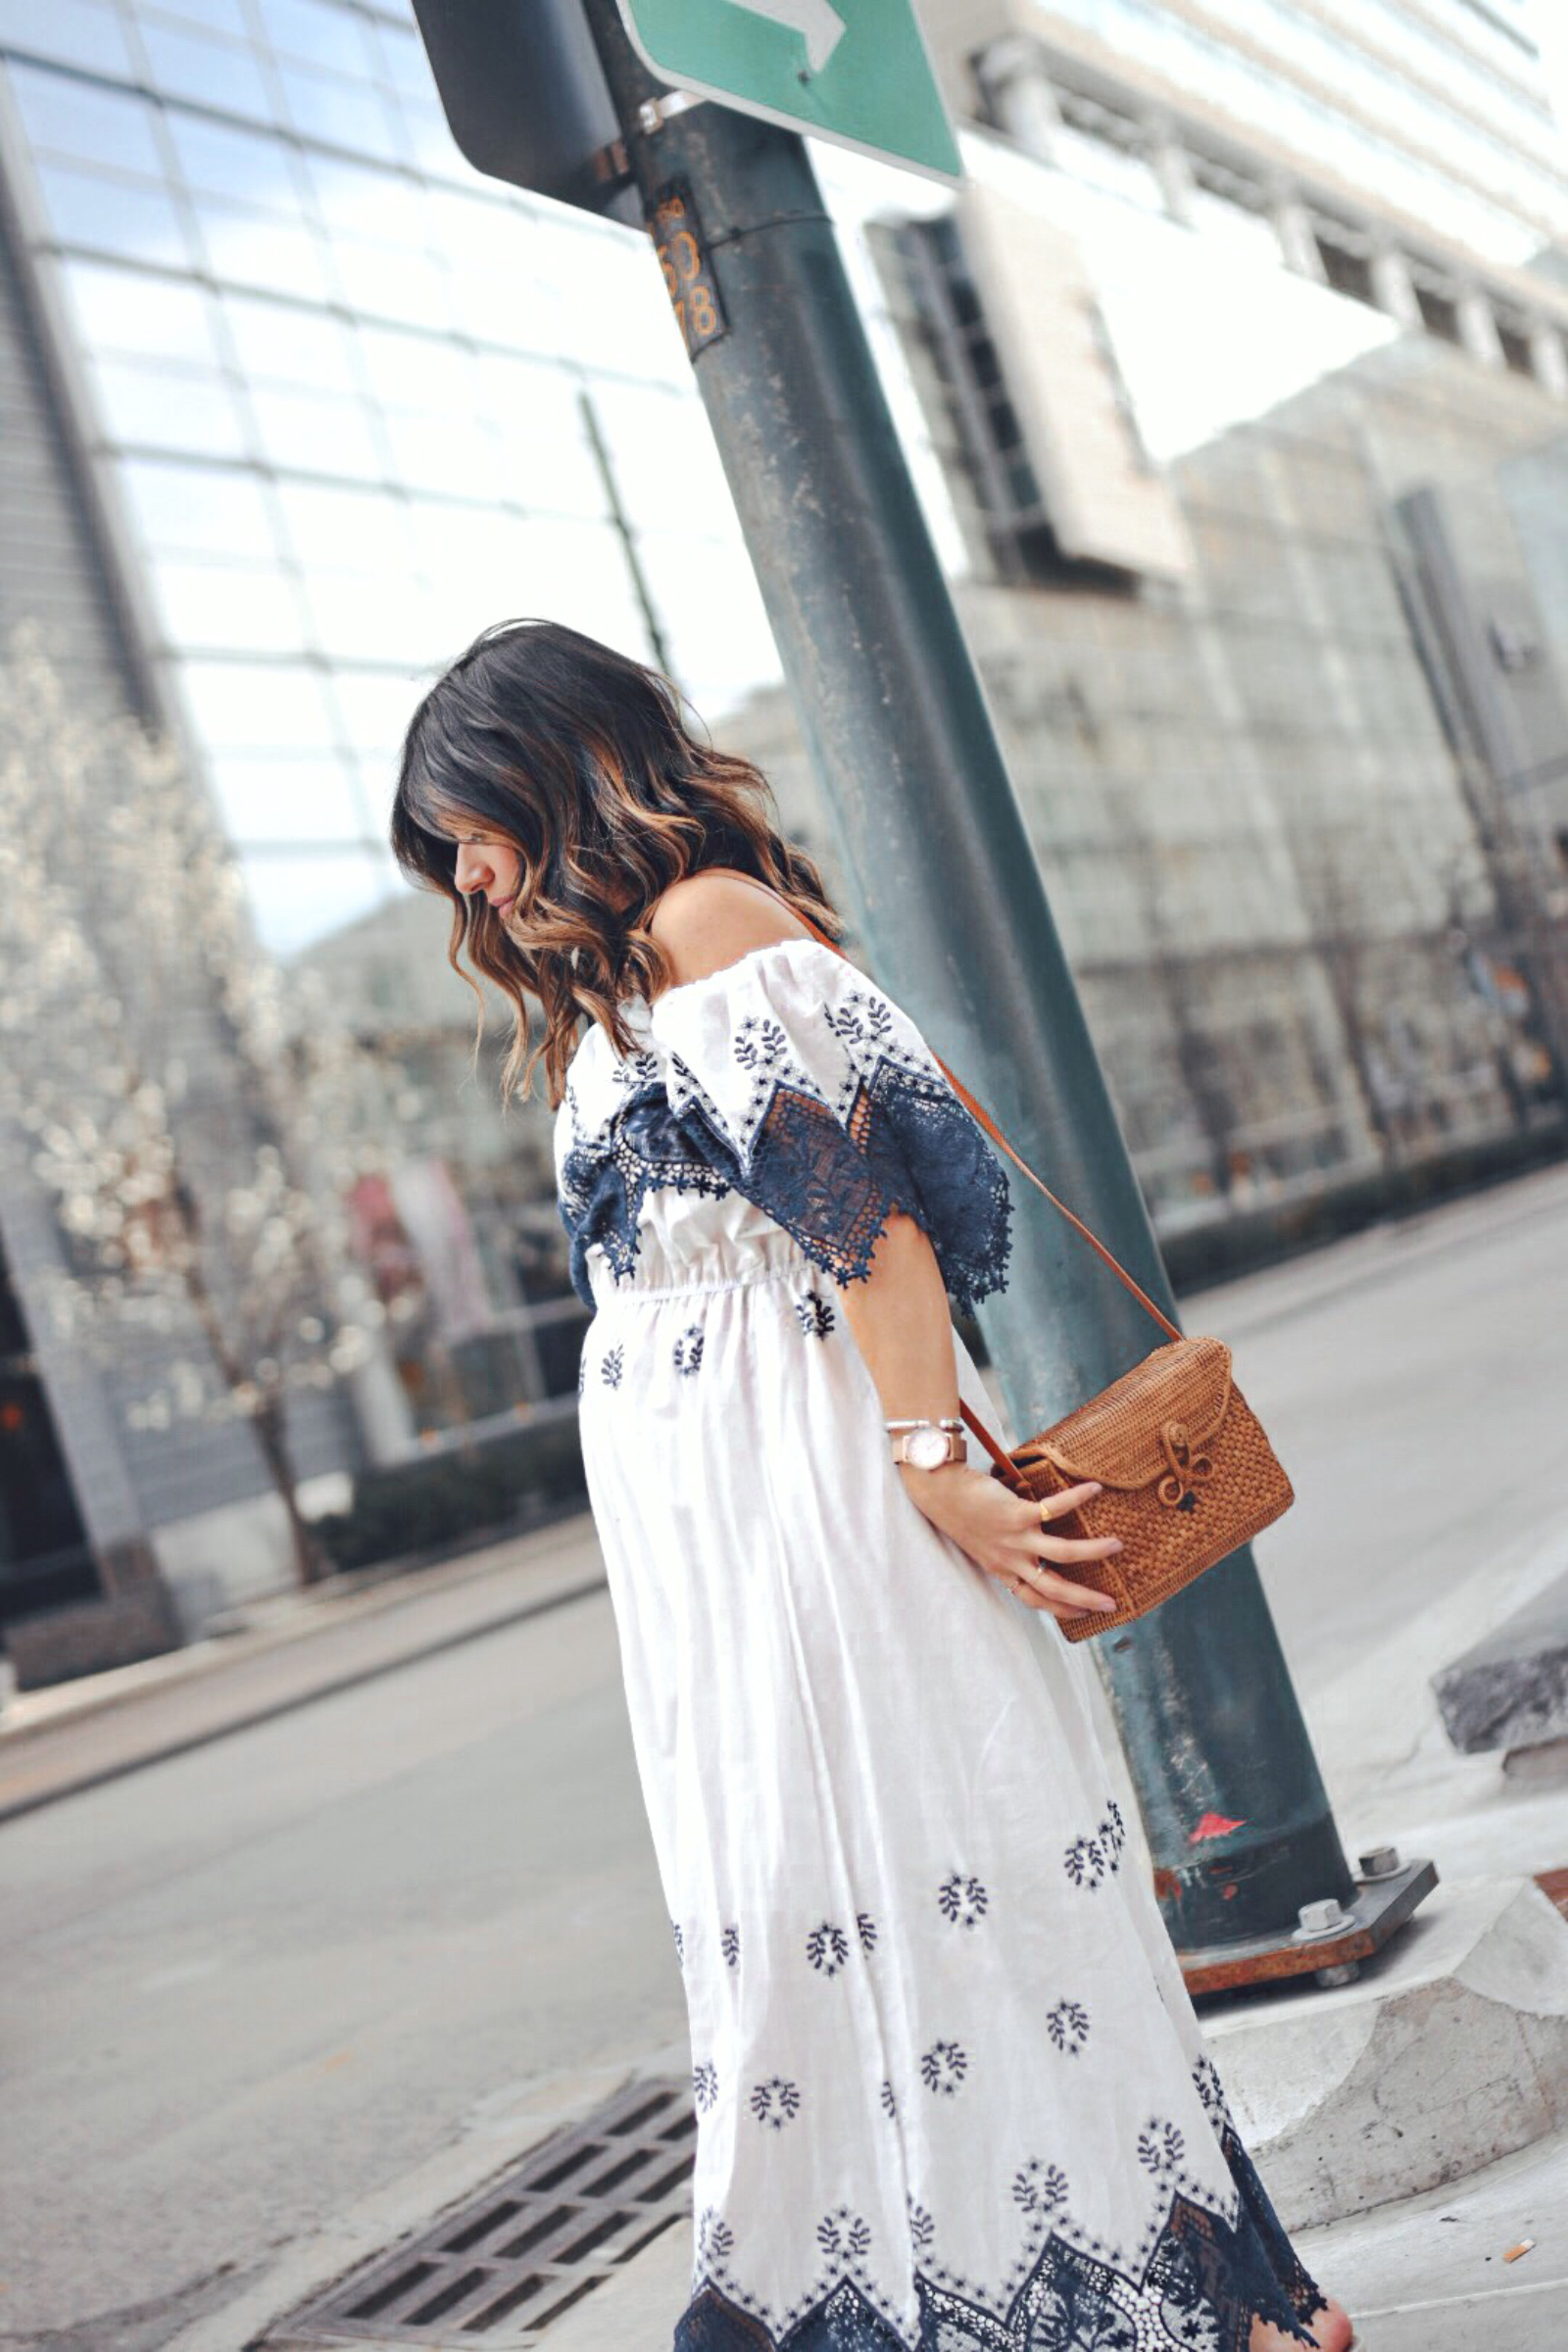 Carolina Hellal wearing a Chicwish maxi dress, woven bag and beige slides - STATEMENT DRESSES featured by popular Denver fashion blogger, Chic Talk